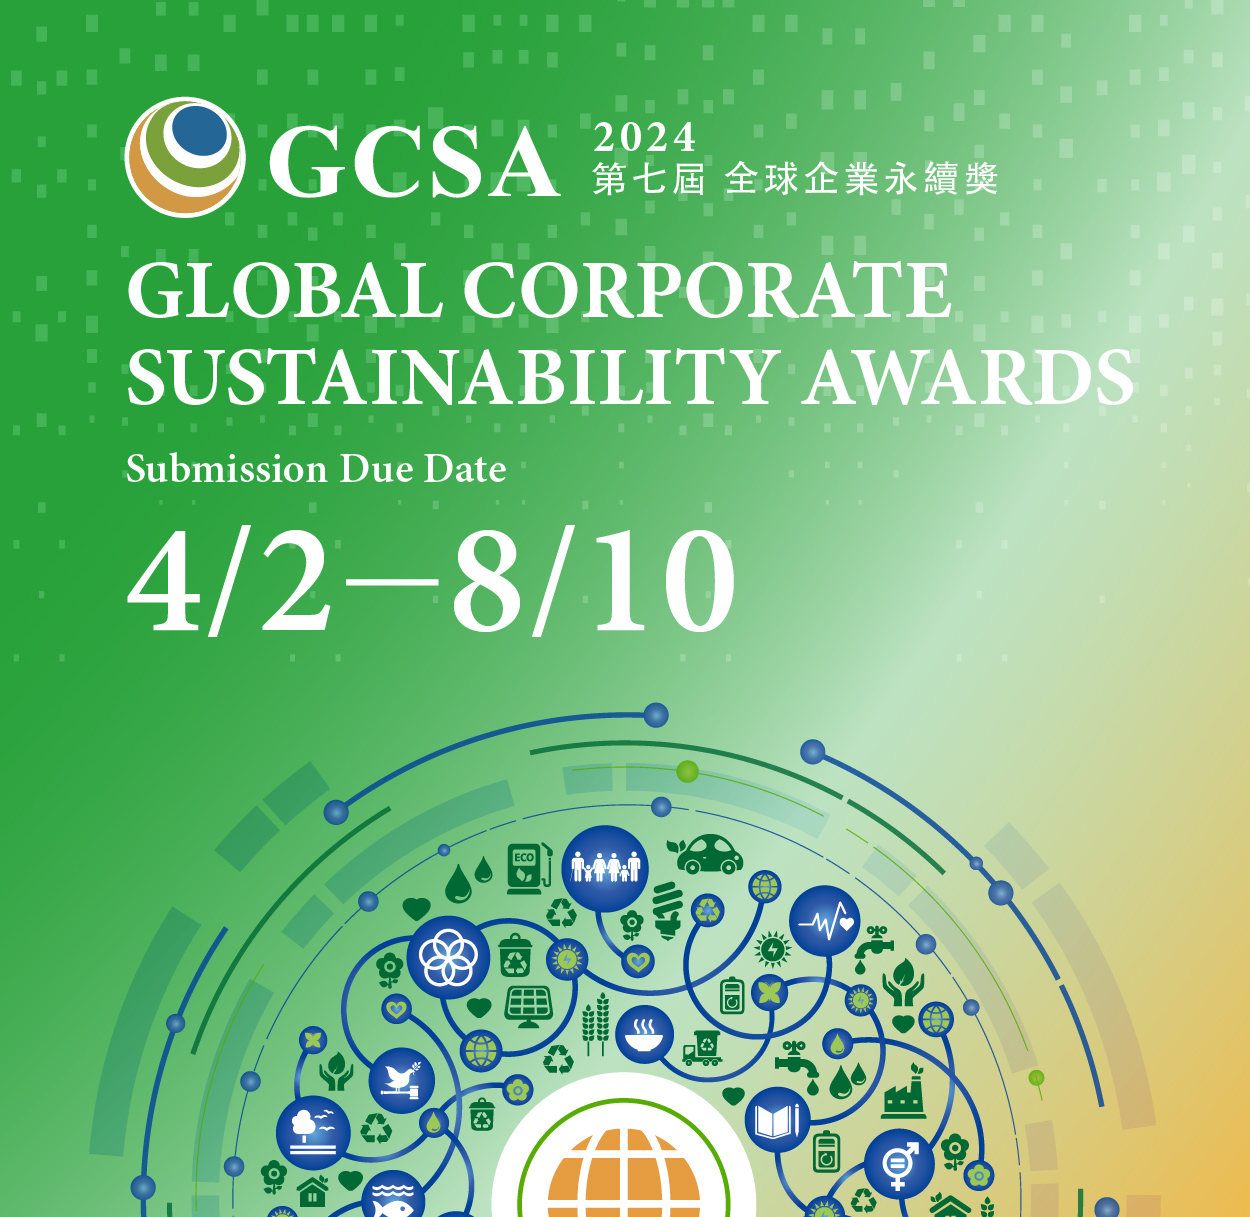 2024 GLOBAL CORPORATE SUSTAINABILITY AWARDS Are Open Now 